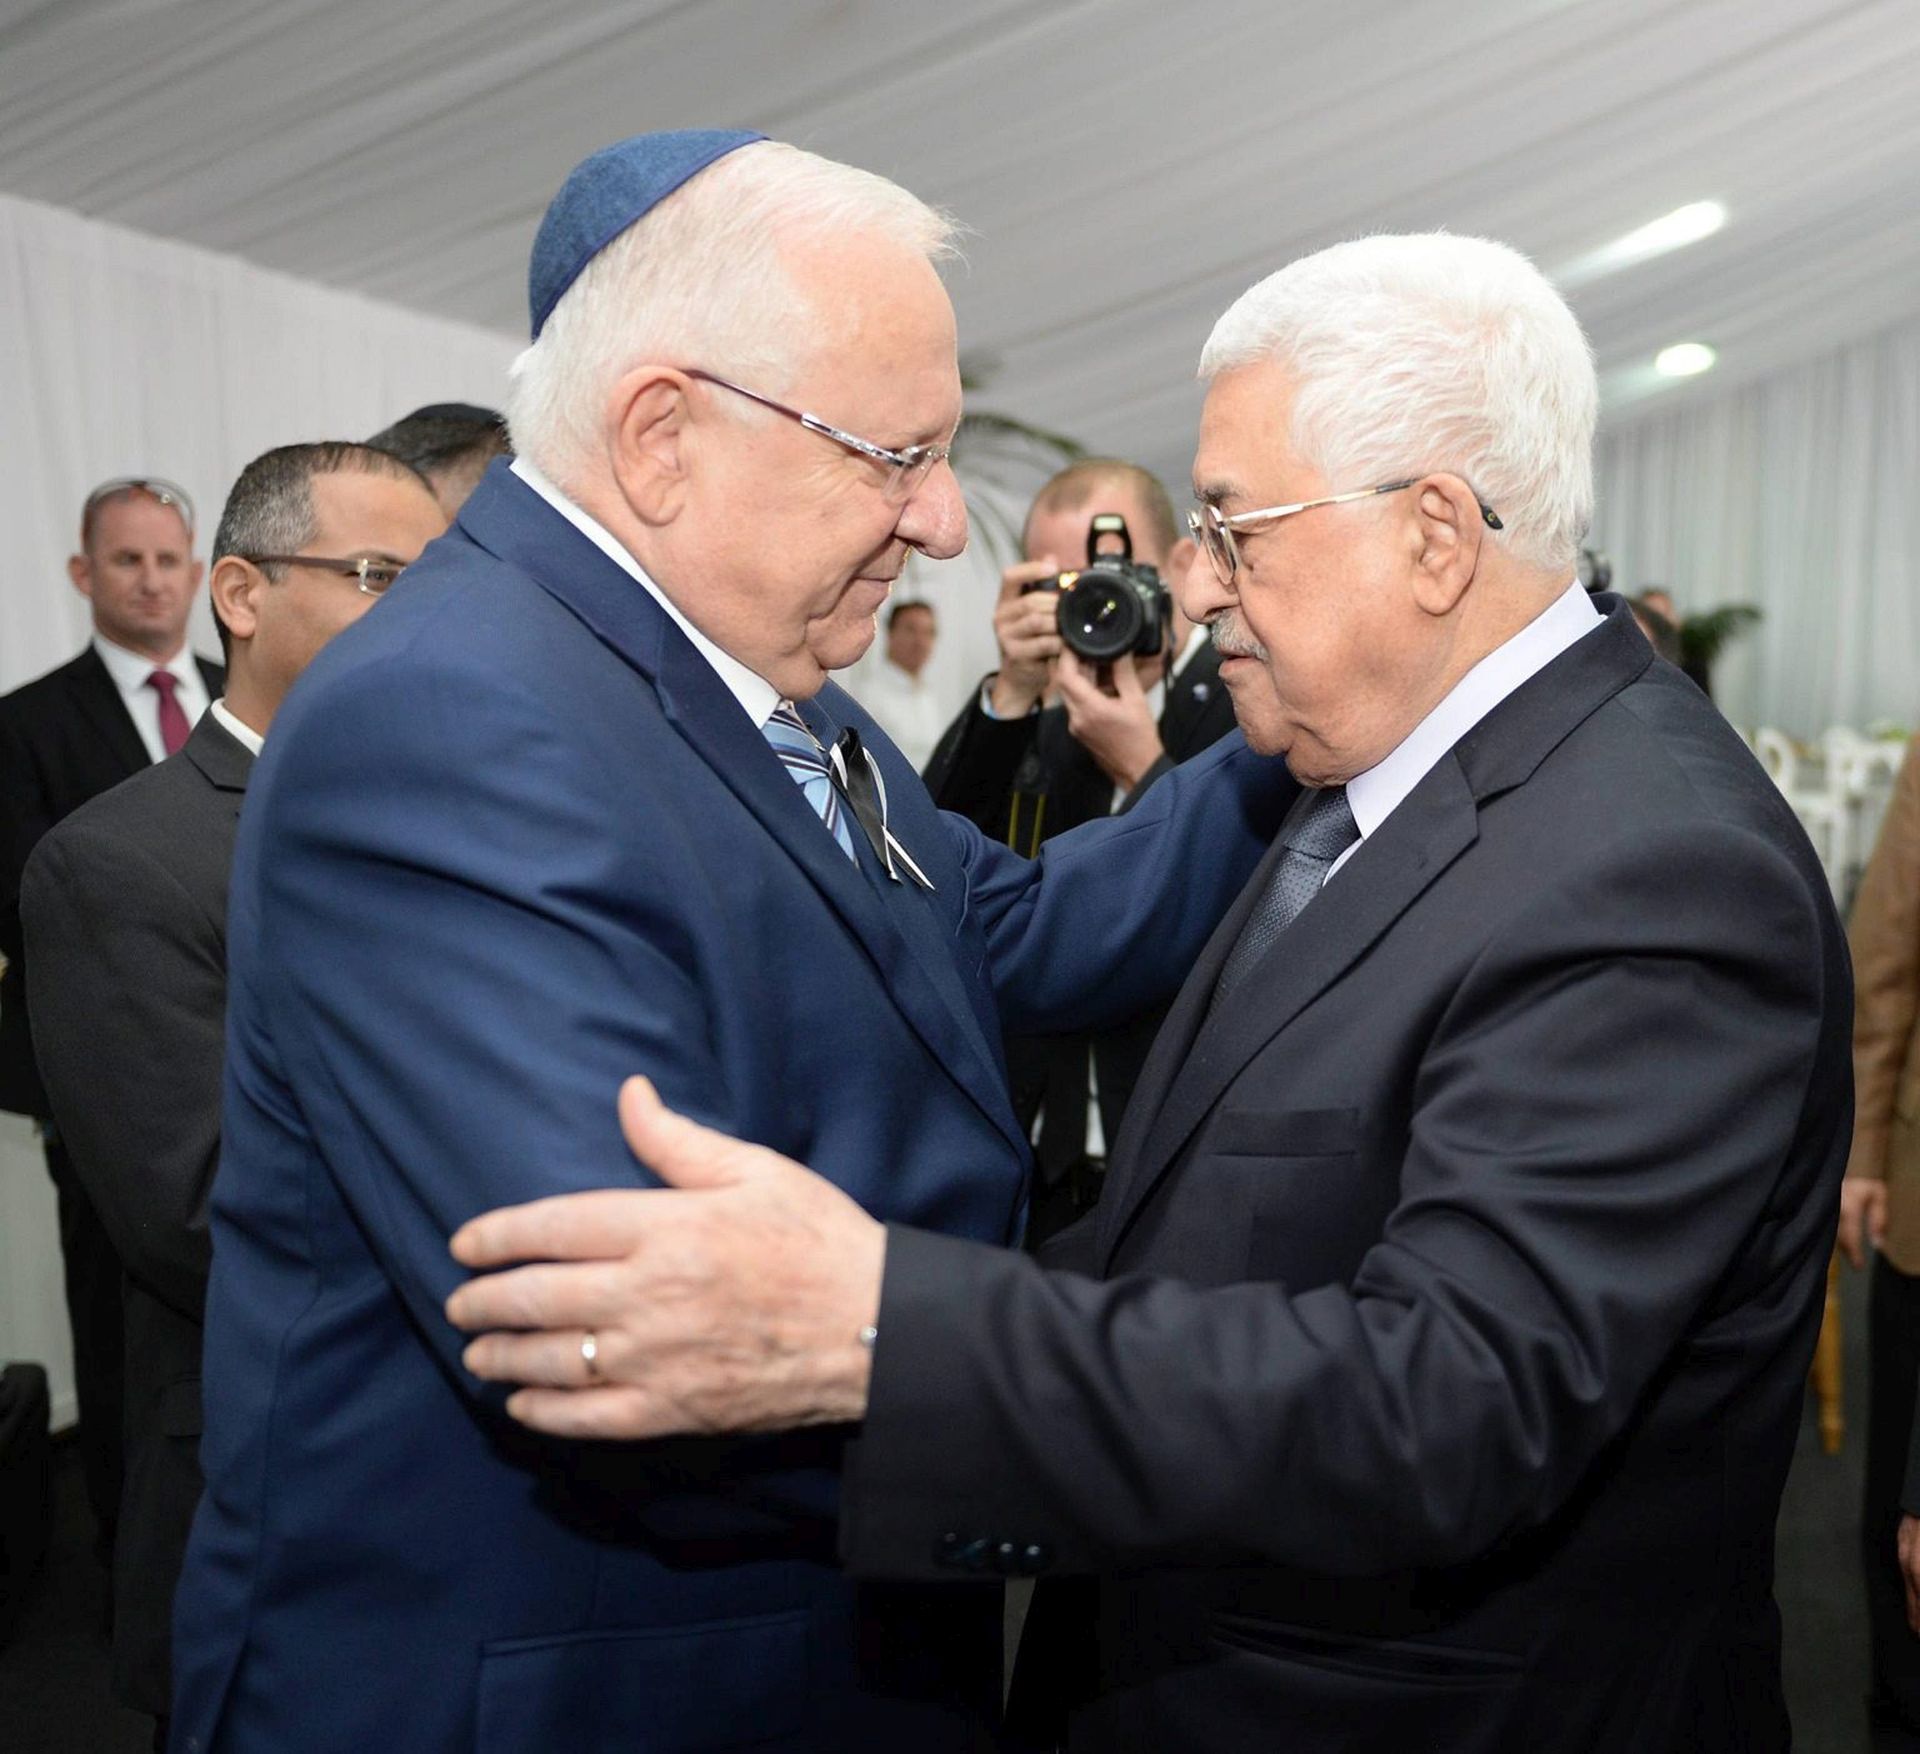 epa05564079 A handout image issued by the Israeli government press office, GPO, showing Israeli President Reuven Rivlin (L) meeting with Palestinian President Mahmoud Abbas during the burial ceremony at the funeral former Israeli President and Nobel Peace Prize winner, Shimon Peres, Mount Herzl National Cemetery, Jerusalem, Israel, 30 September 2016. Peres died on September 28 at age 93.  EPA/AMOS BEN GERSHOM / HANDOUT ISRAEL OUT HANDOUT EDITORIAL USE ONLY/NO SALES